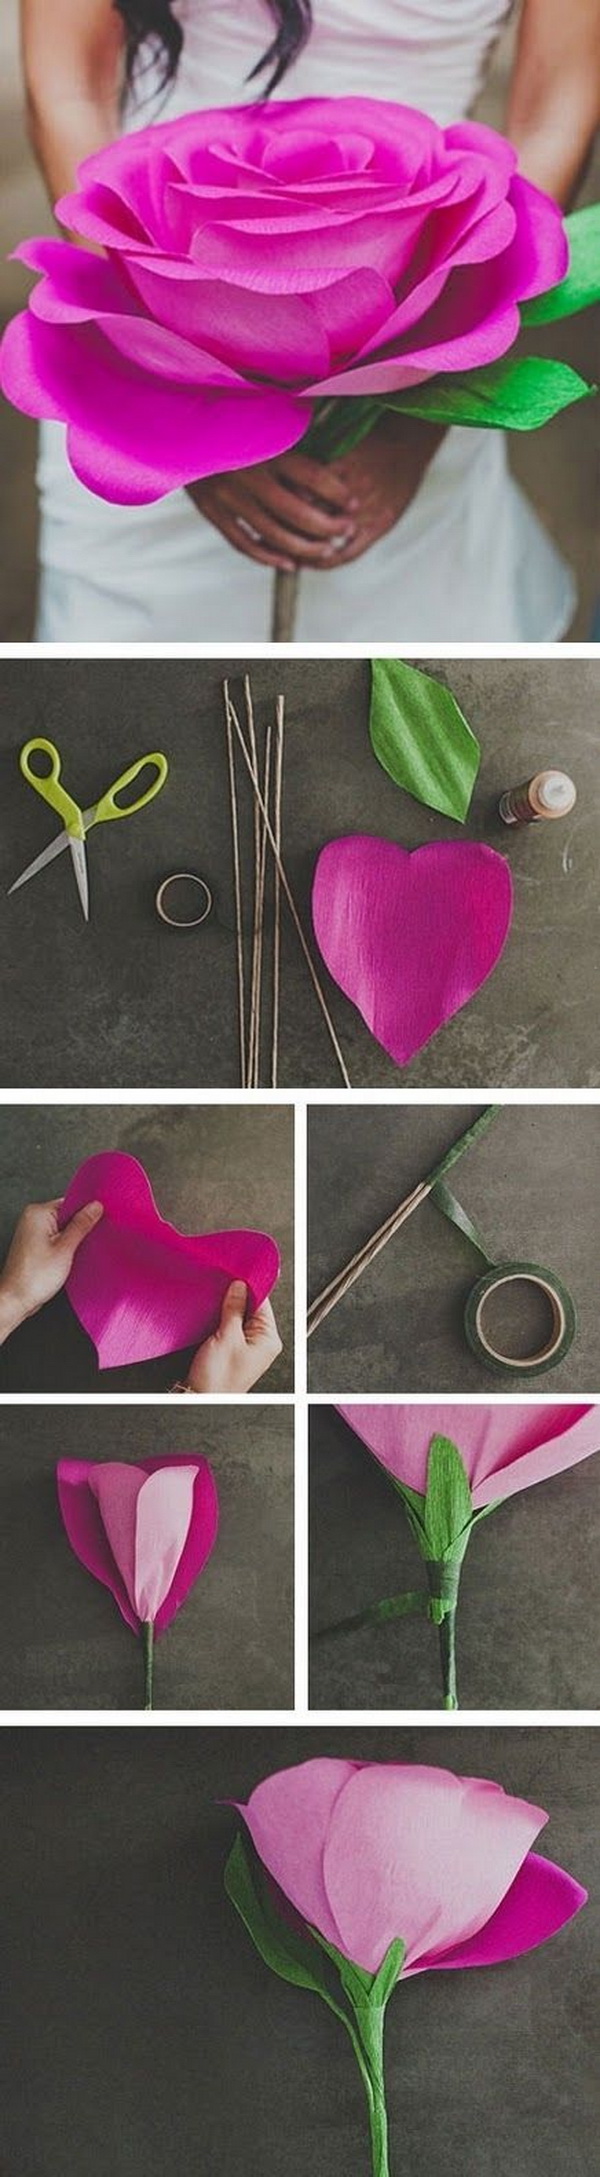 DIY Giant Paper Rose Flower. Every mom would love this beautiful gift! 